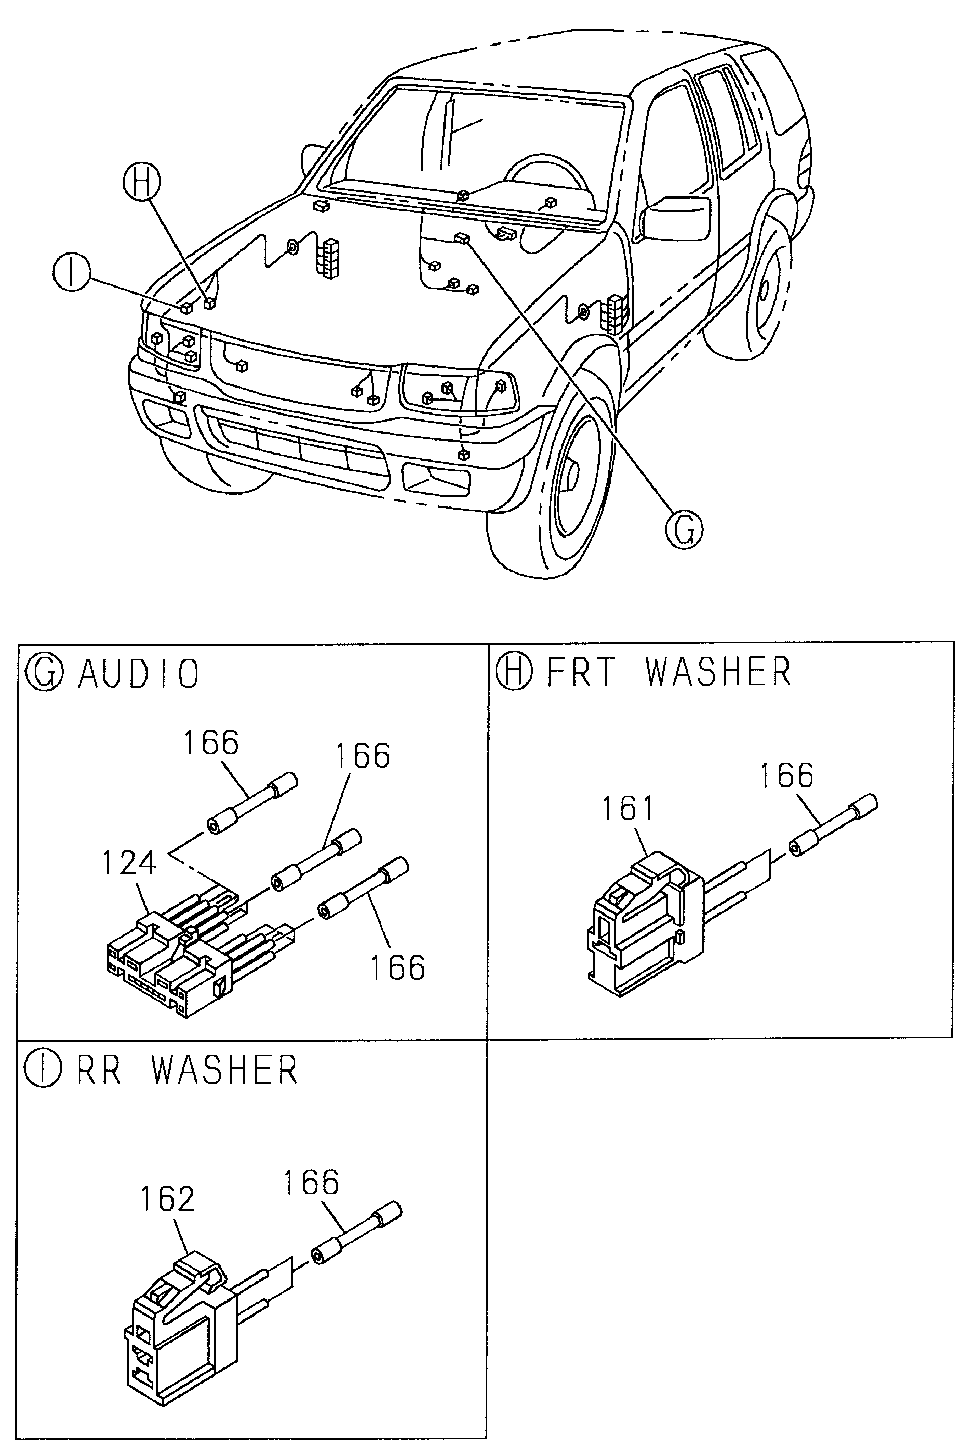 8-97214-662-0 - CONNECTOR, RR. WASHER